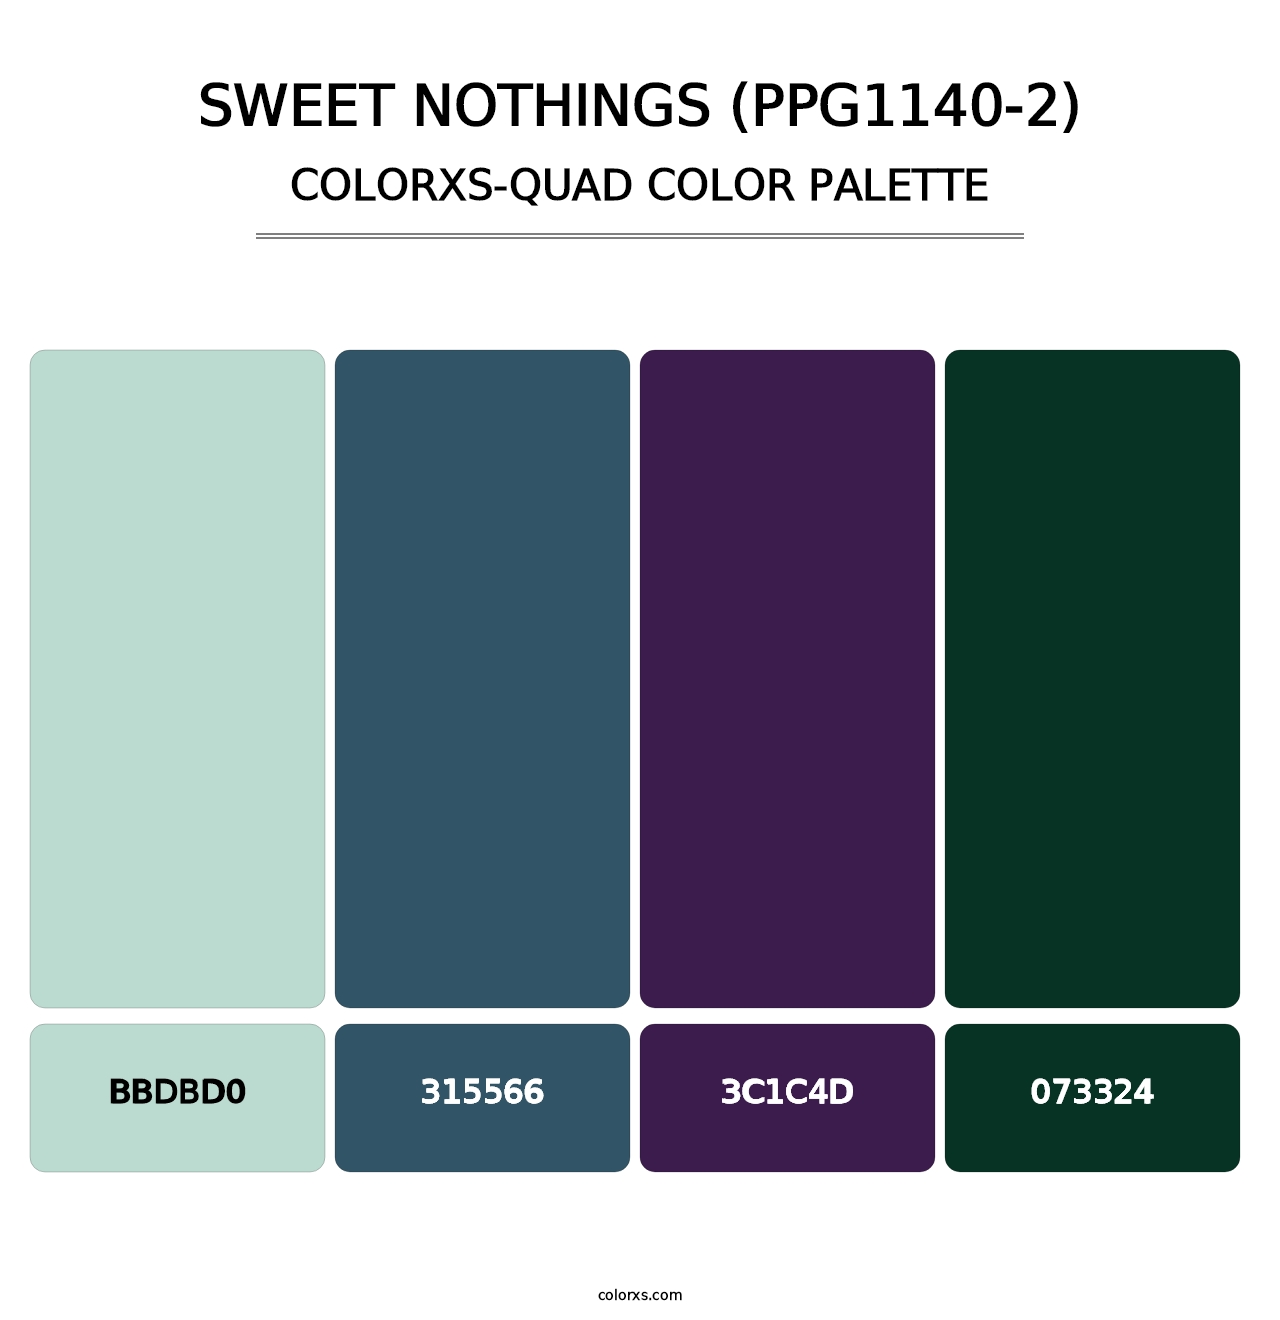 Sweet Nothings (PPG1140-2) - Colorxs Quad Palette